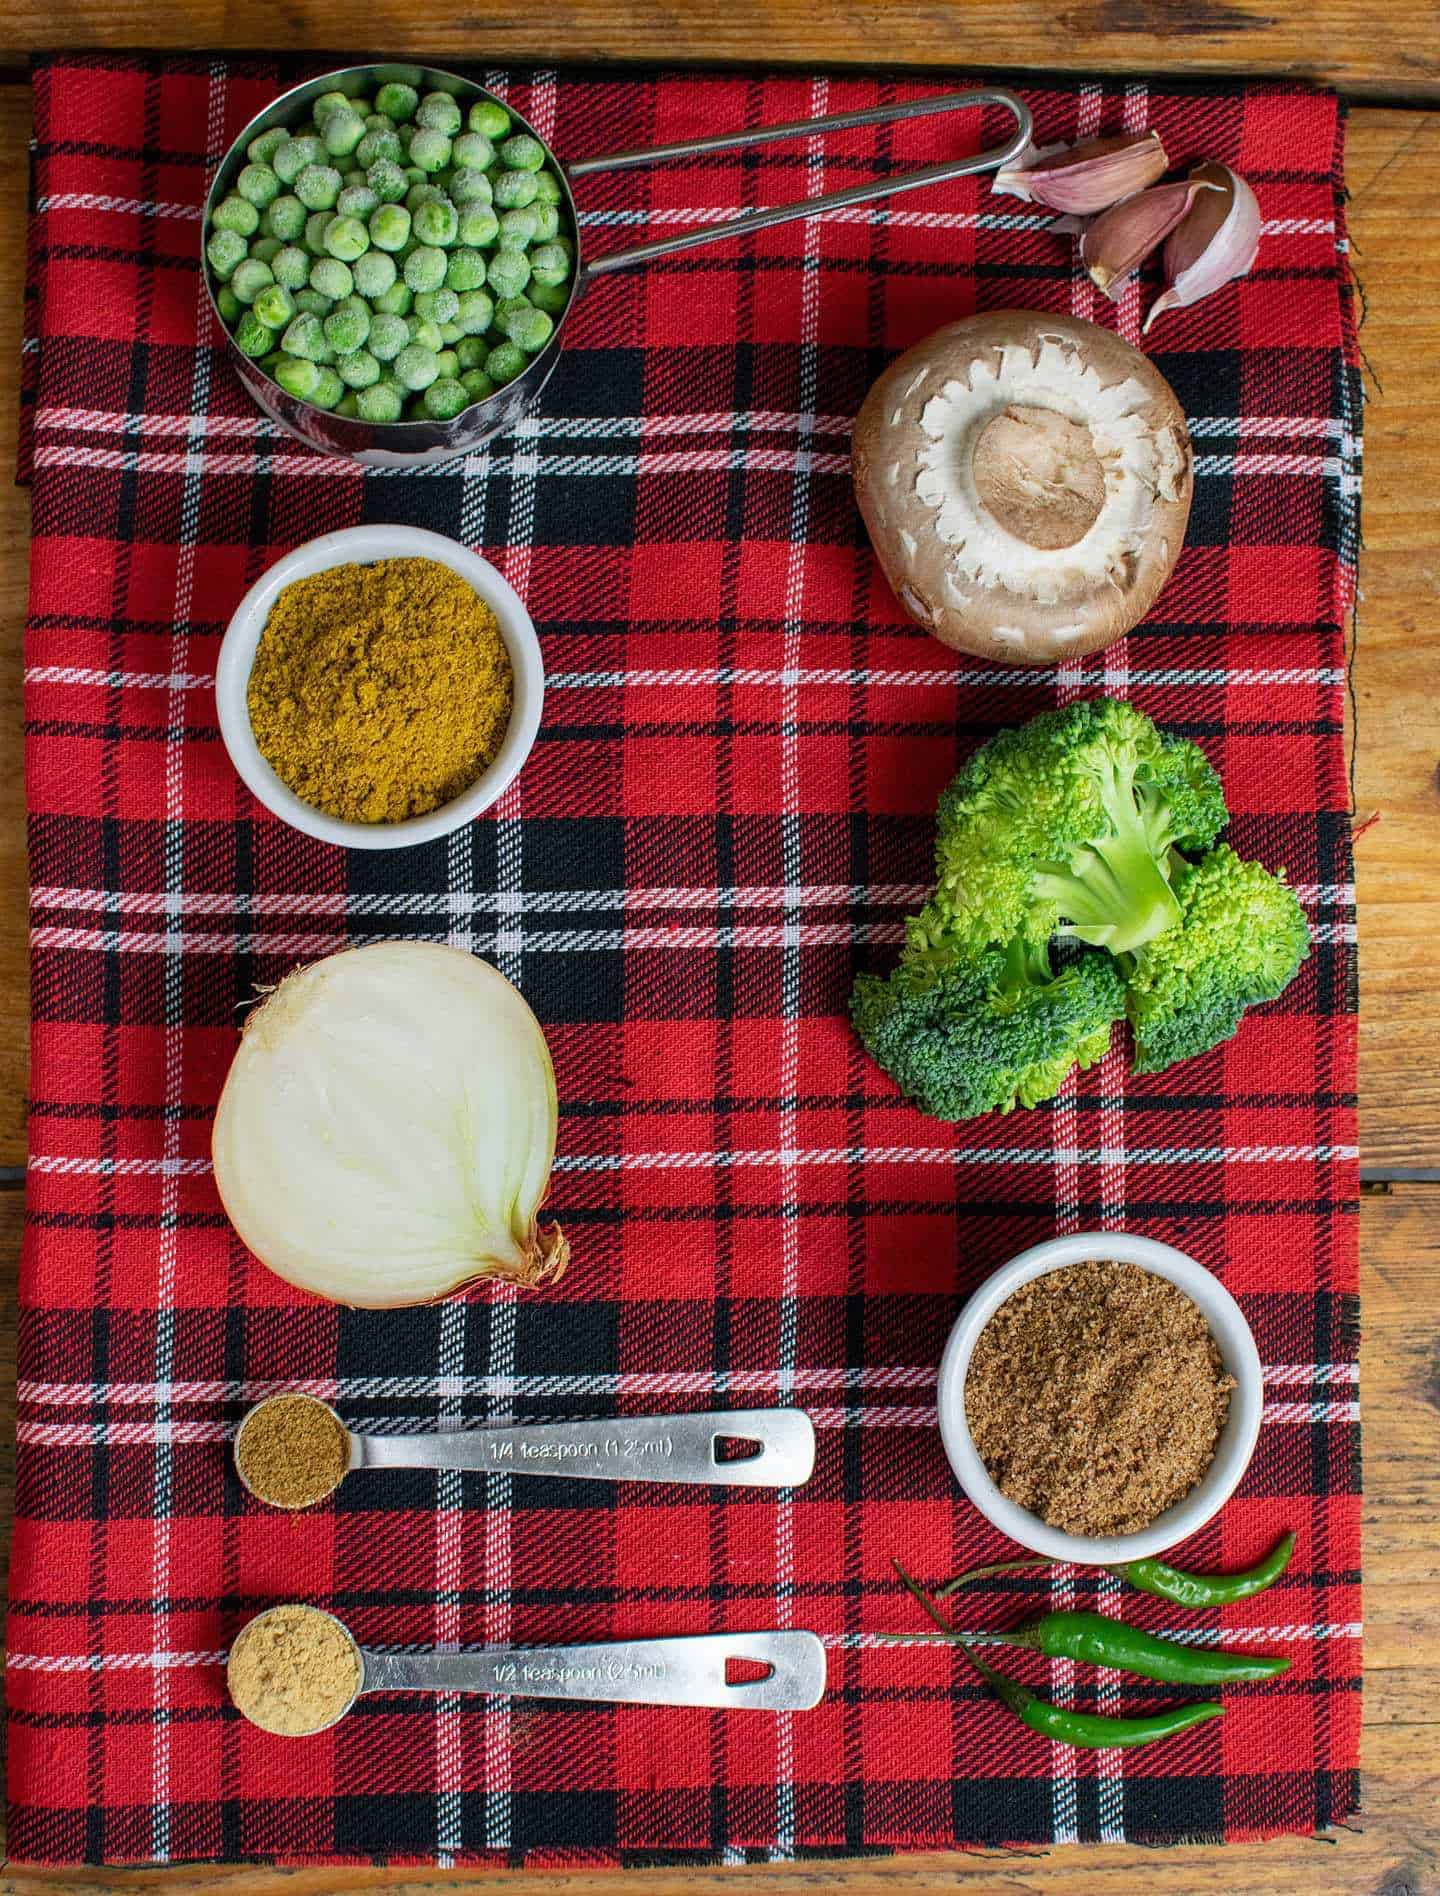 All the fresh ingredients laid out on a red tartan cloth